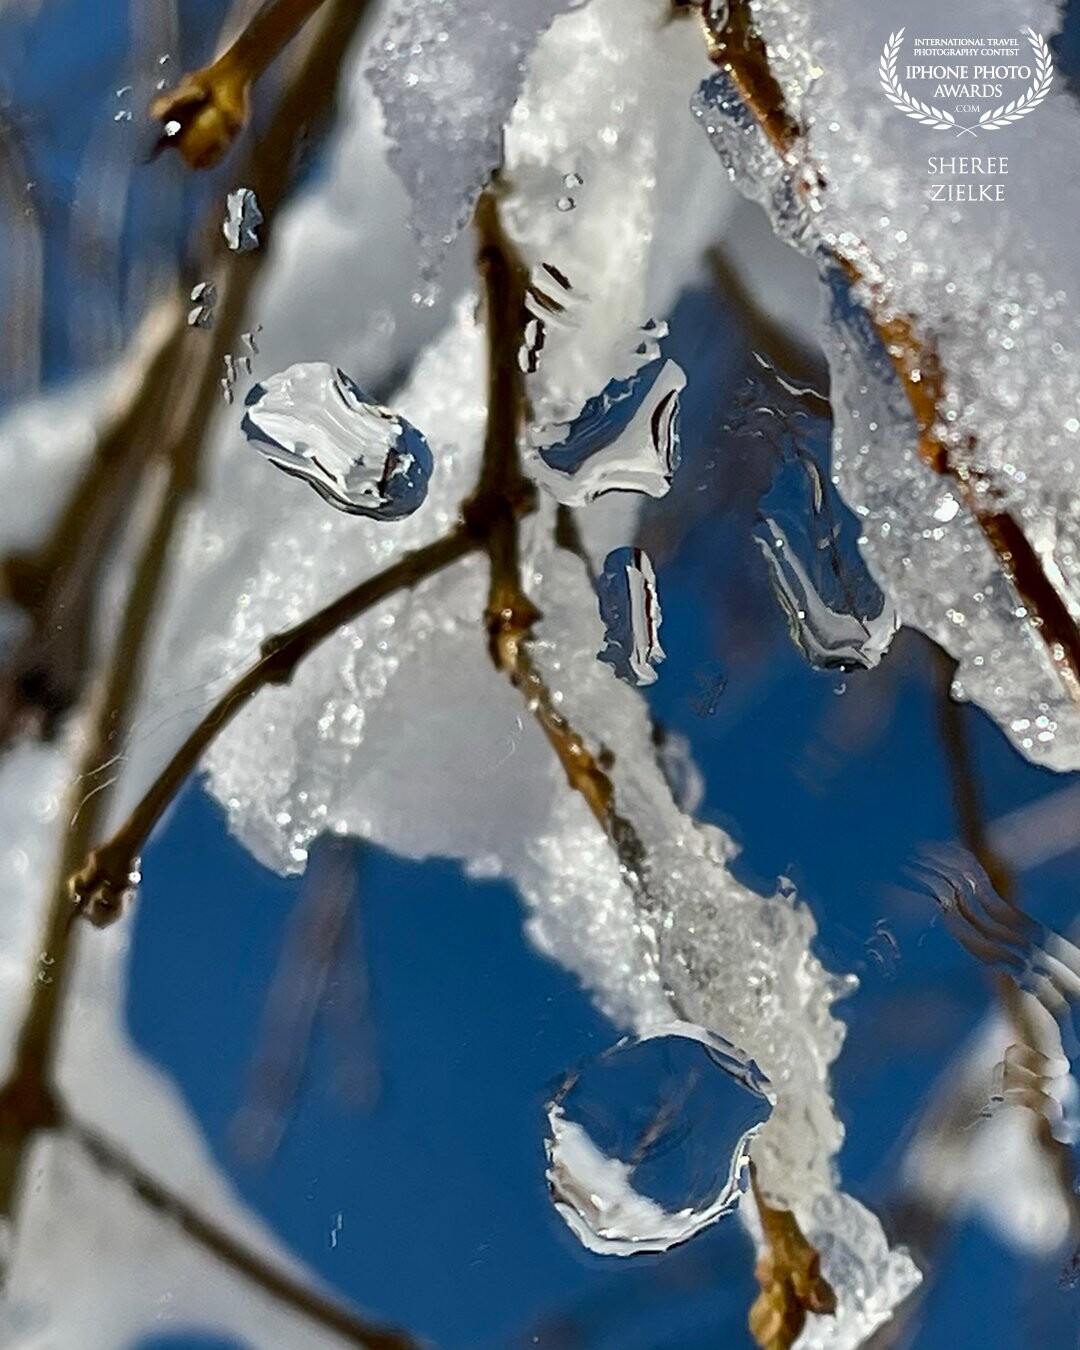 An unexpected heavy wet springtime snowfall here in Alberta, followed by warm afternoon sun led to this photo. I used a small hand mirror to catch water droplets from the melting snow, and to reflect light back up into the snow laden branches. . I loved the deep blue sky backdrop in the reflection.